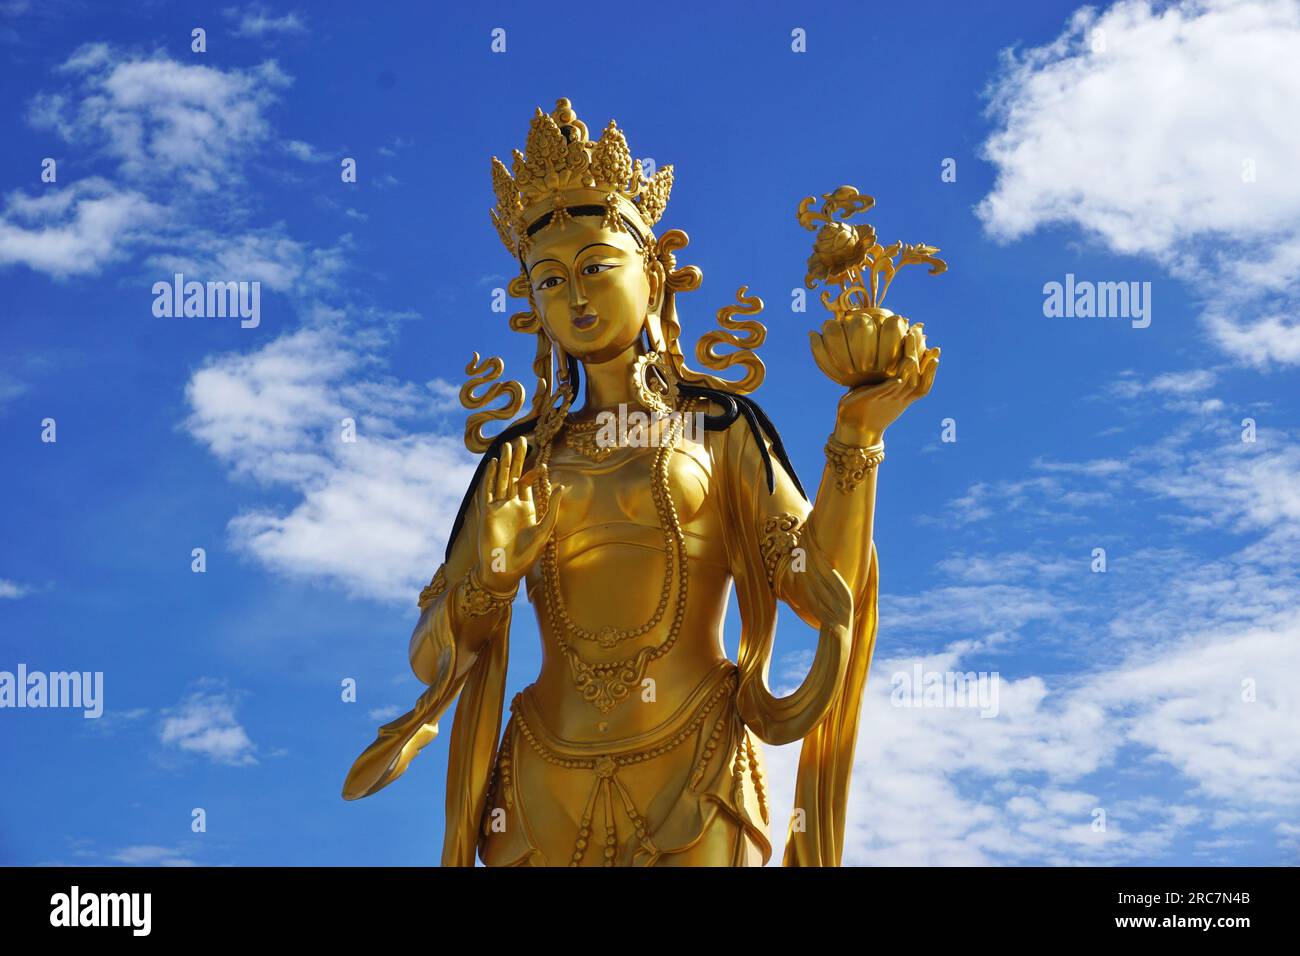 Golden goddess statue stands in silhouette against blue sky at the Buddha Dordenma monument in the Kuensel Phodrang nature park near Thimphu, Bhutan Stock Photo